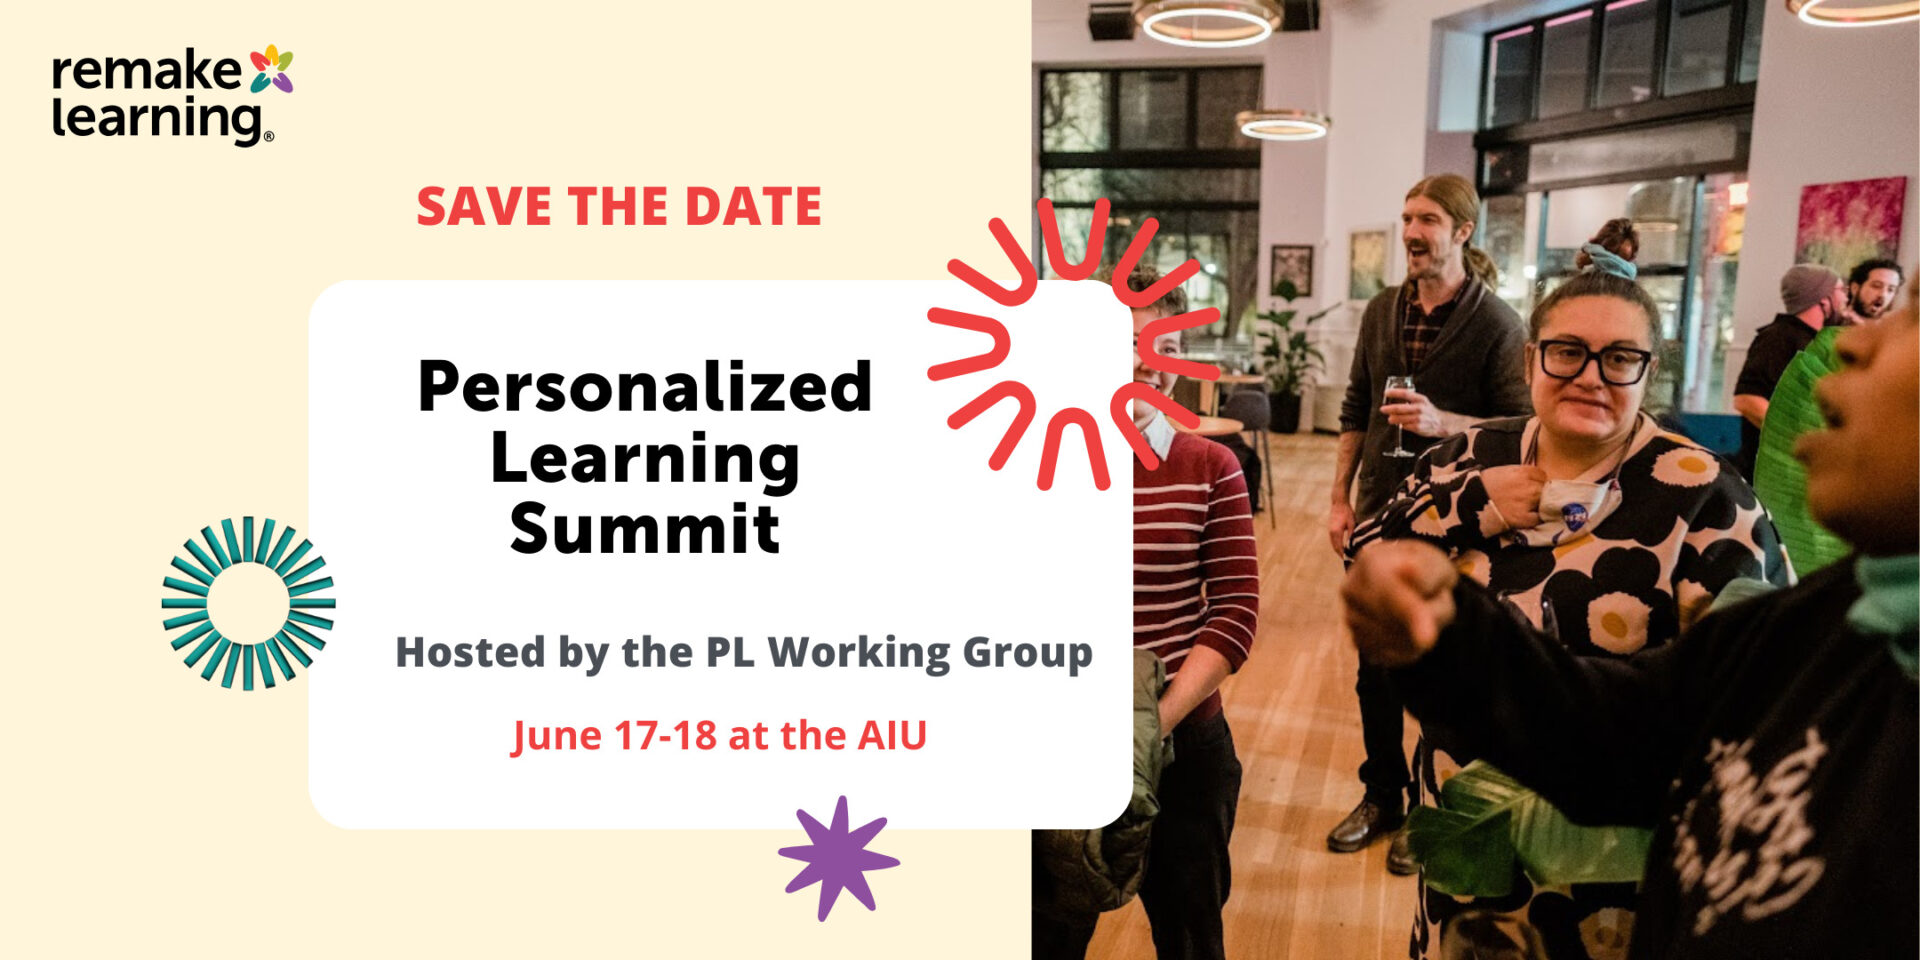 Save the Date: Personalized Learning Summit